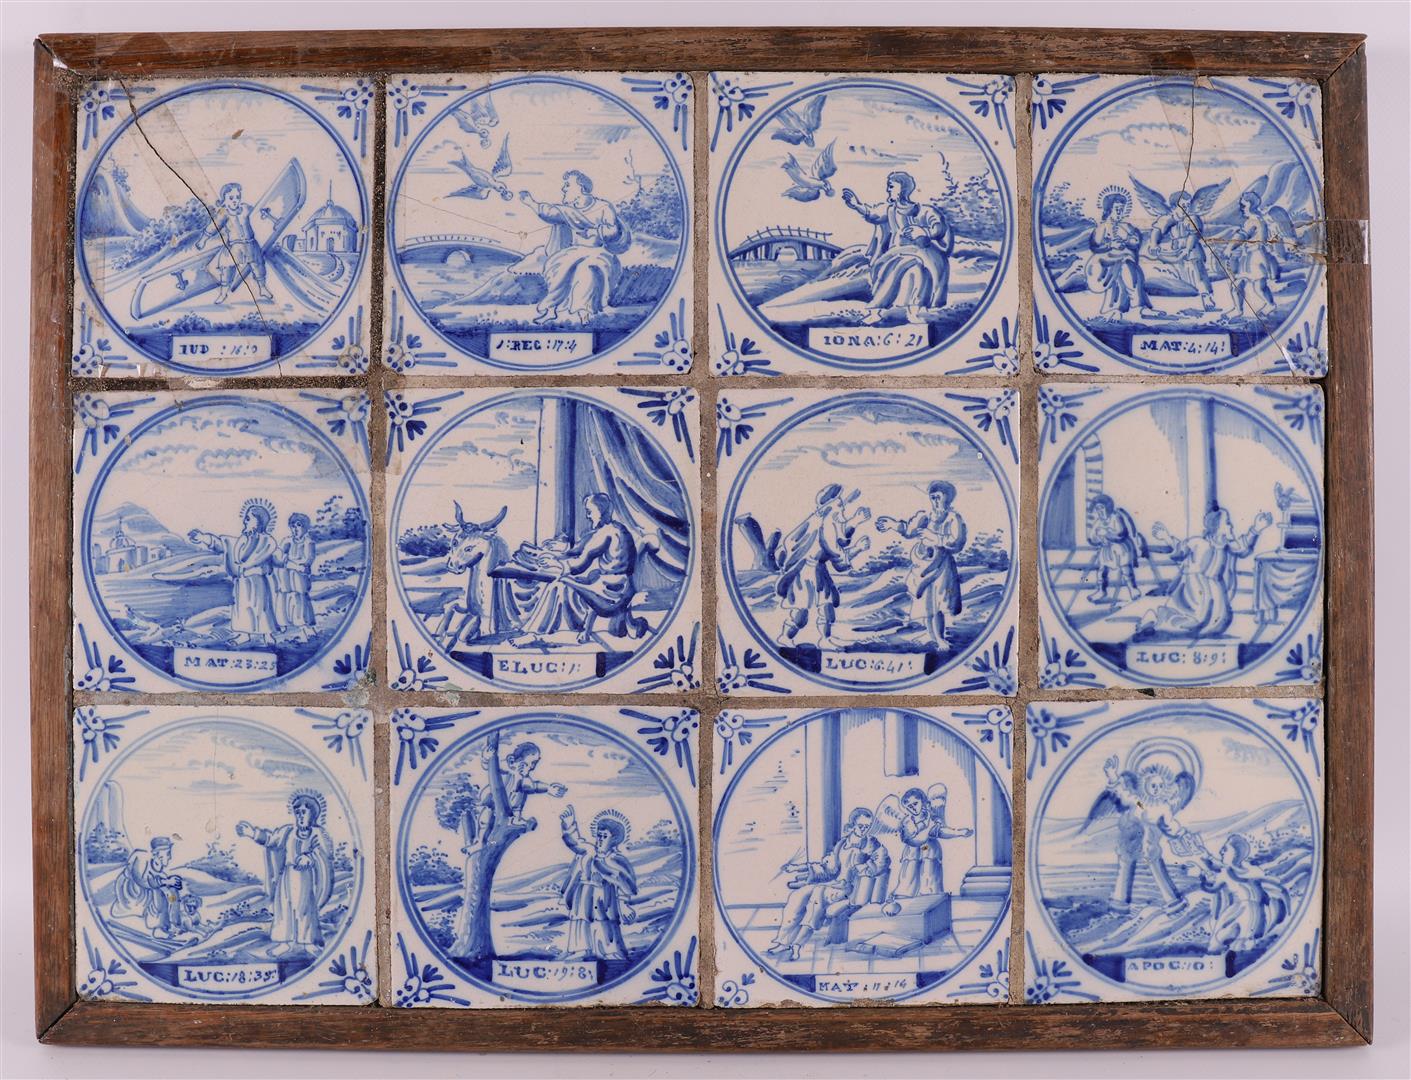 A twelve-step tile tableau with blue/white religious tiles, 18th century. - Image 2 of 3